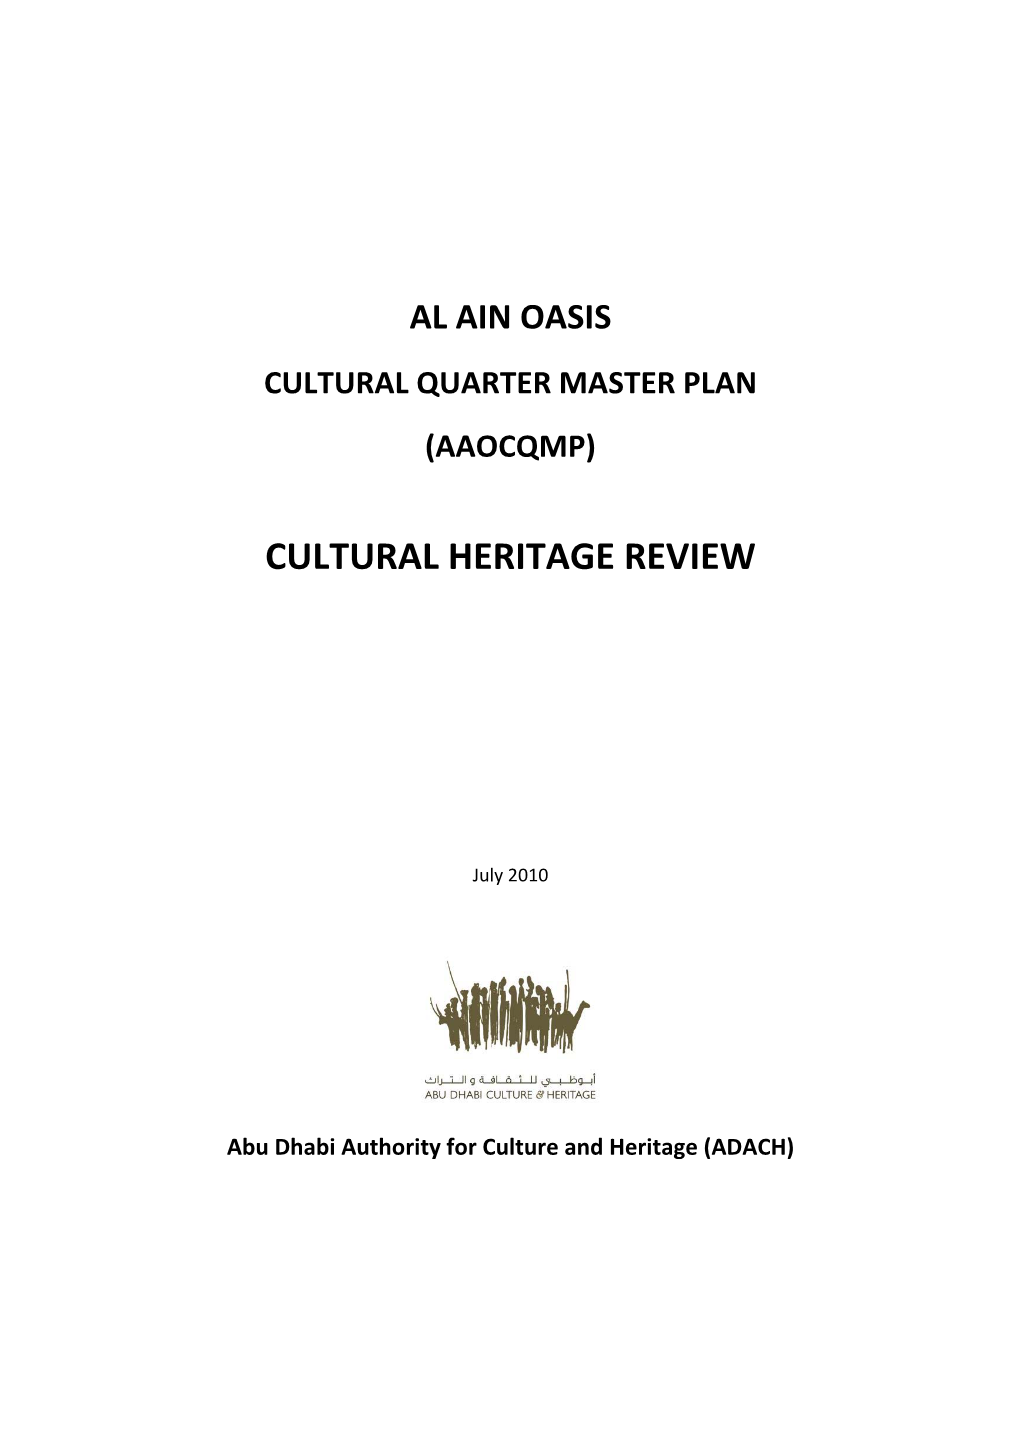 Cultural Heritage Review